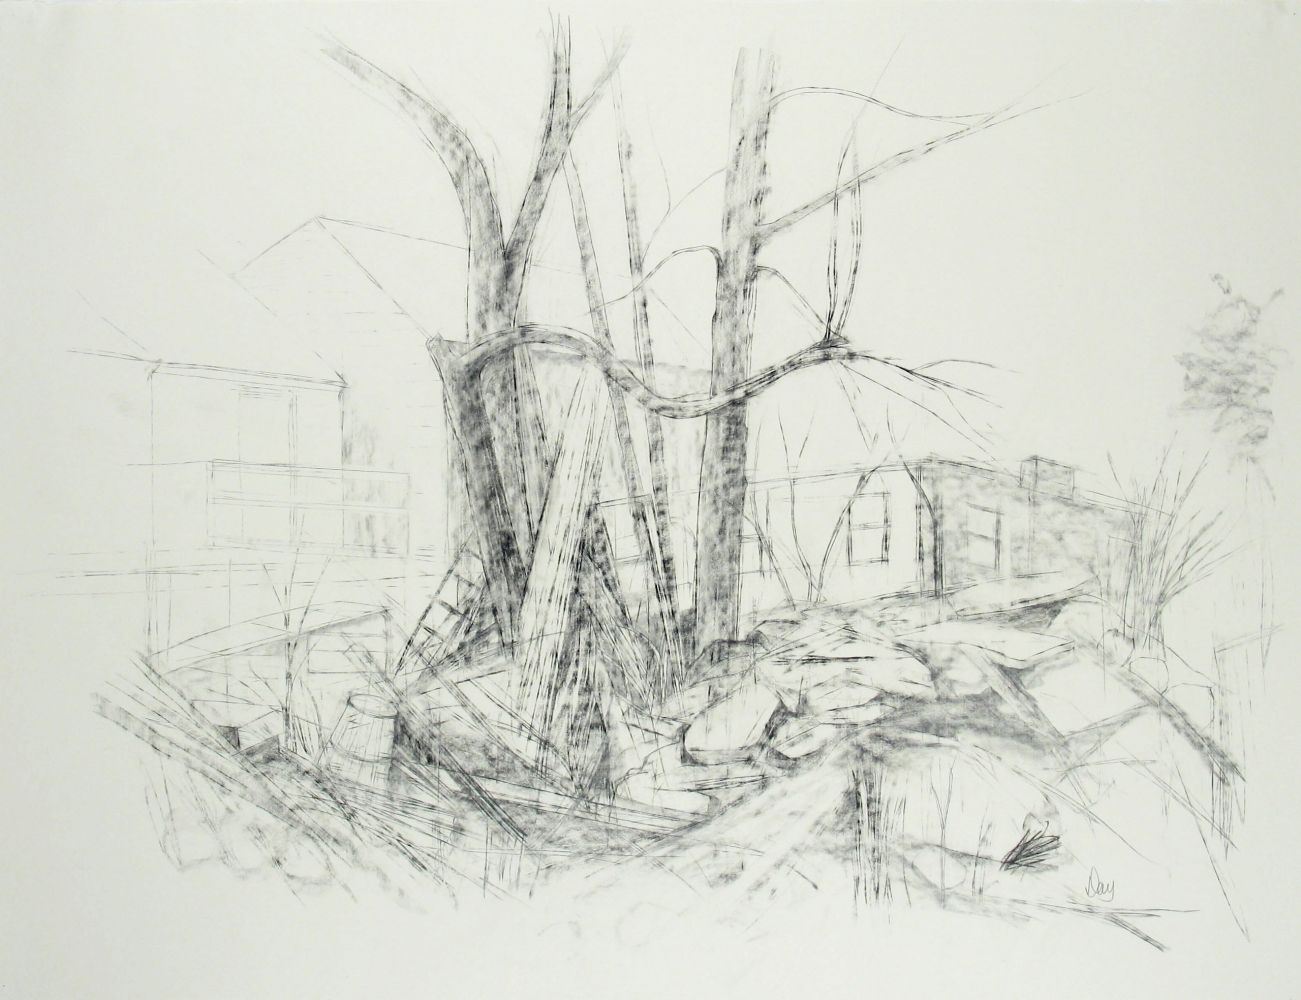 Related to "Yggdrasil", c. 1991  19.75" x 25.88"  Graphite On Paper